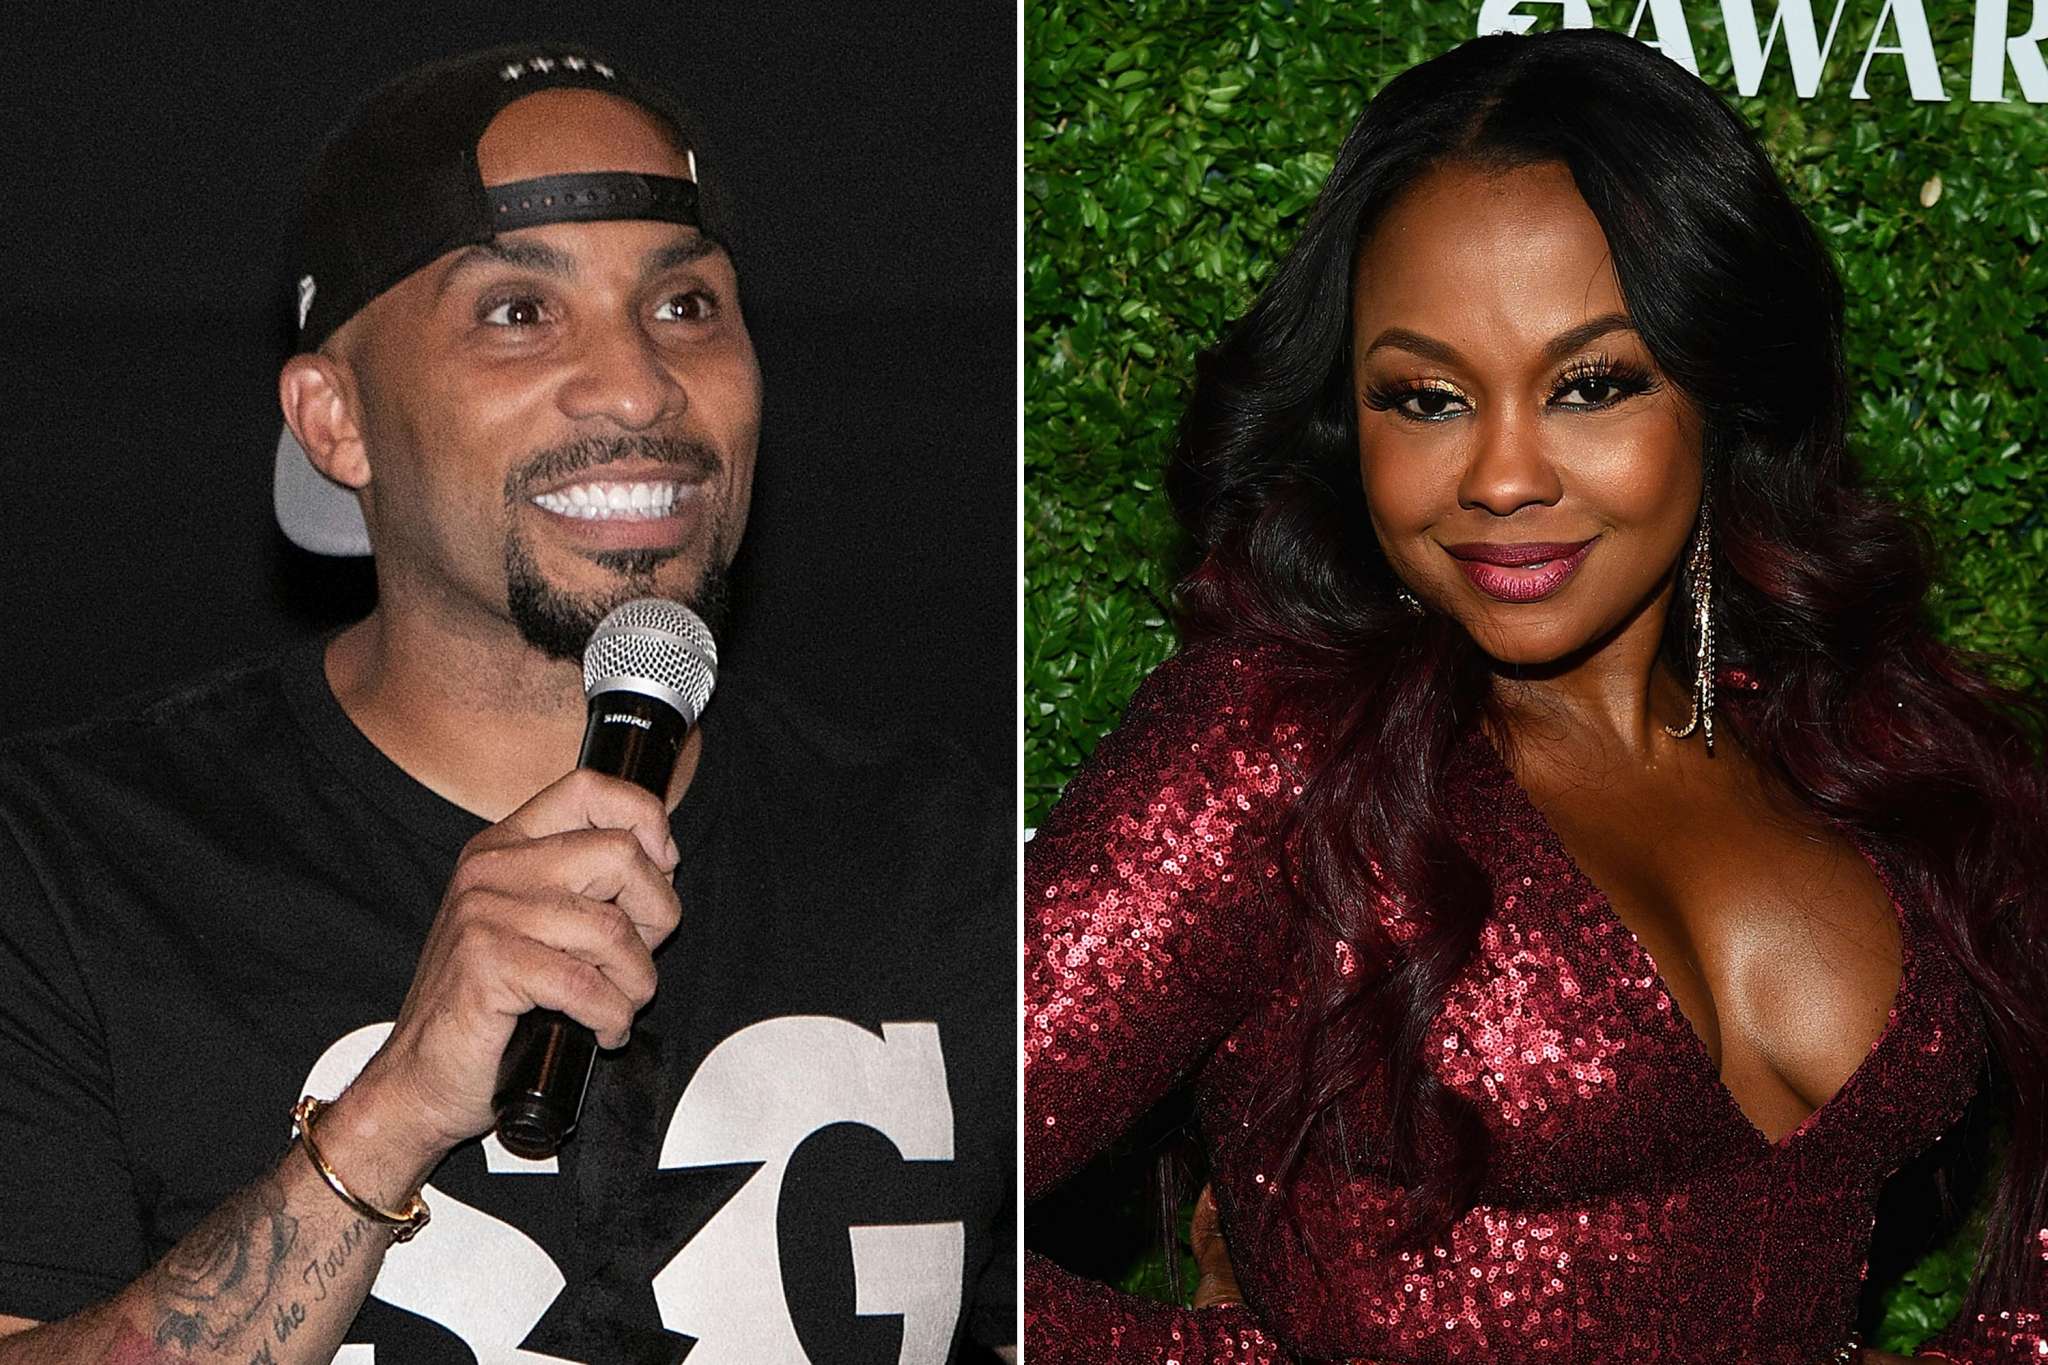 Phaedra Parks Gushes Over Her Man: She Looks Gorgeous In Her Latest Post With Tone Kapone